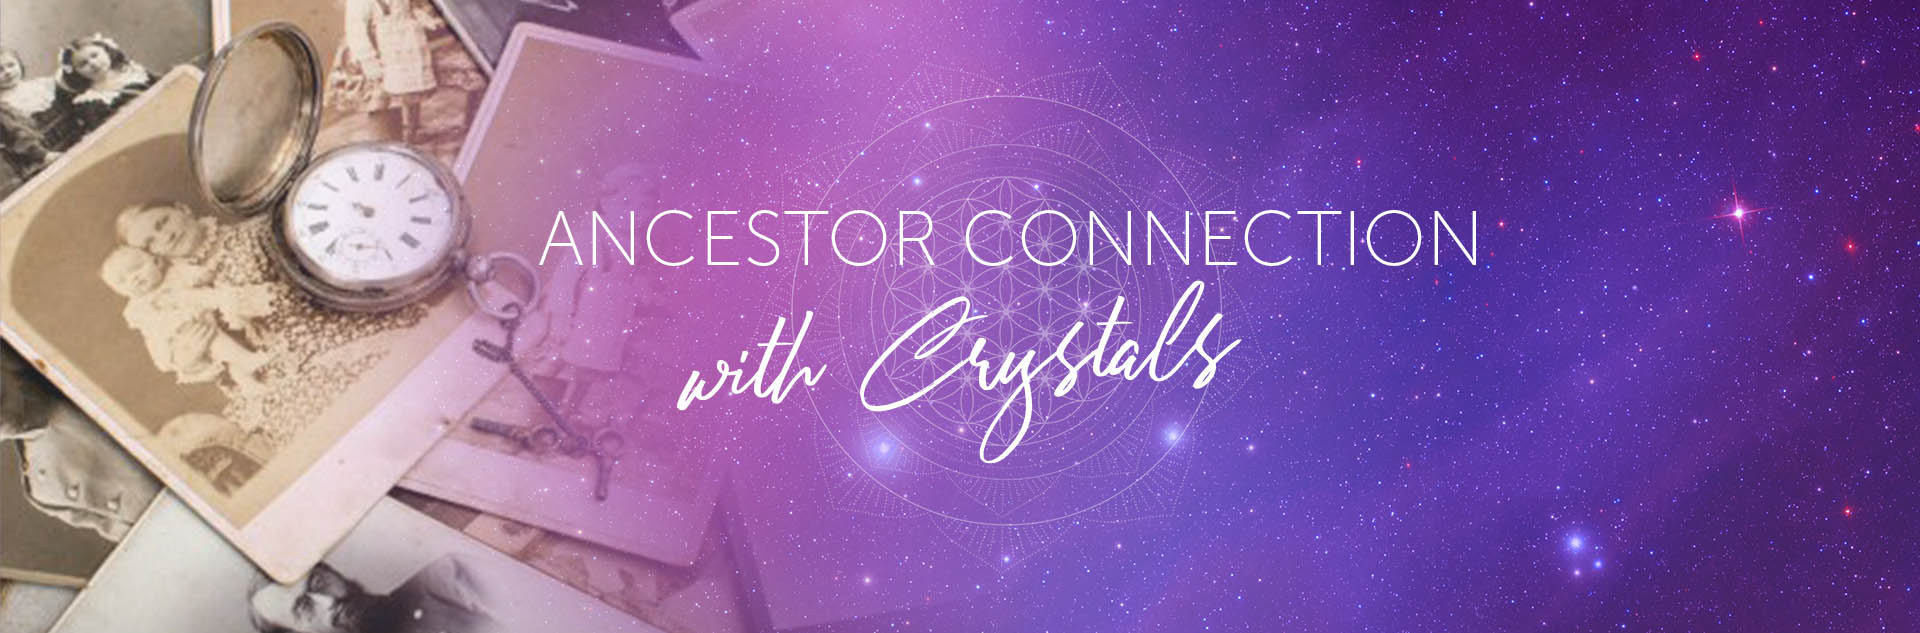 Ancestor Connection with Crystals, Class Elective Hibiscus Moon